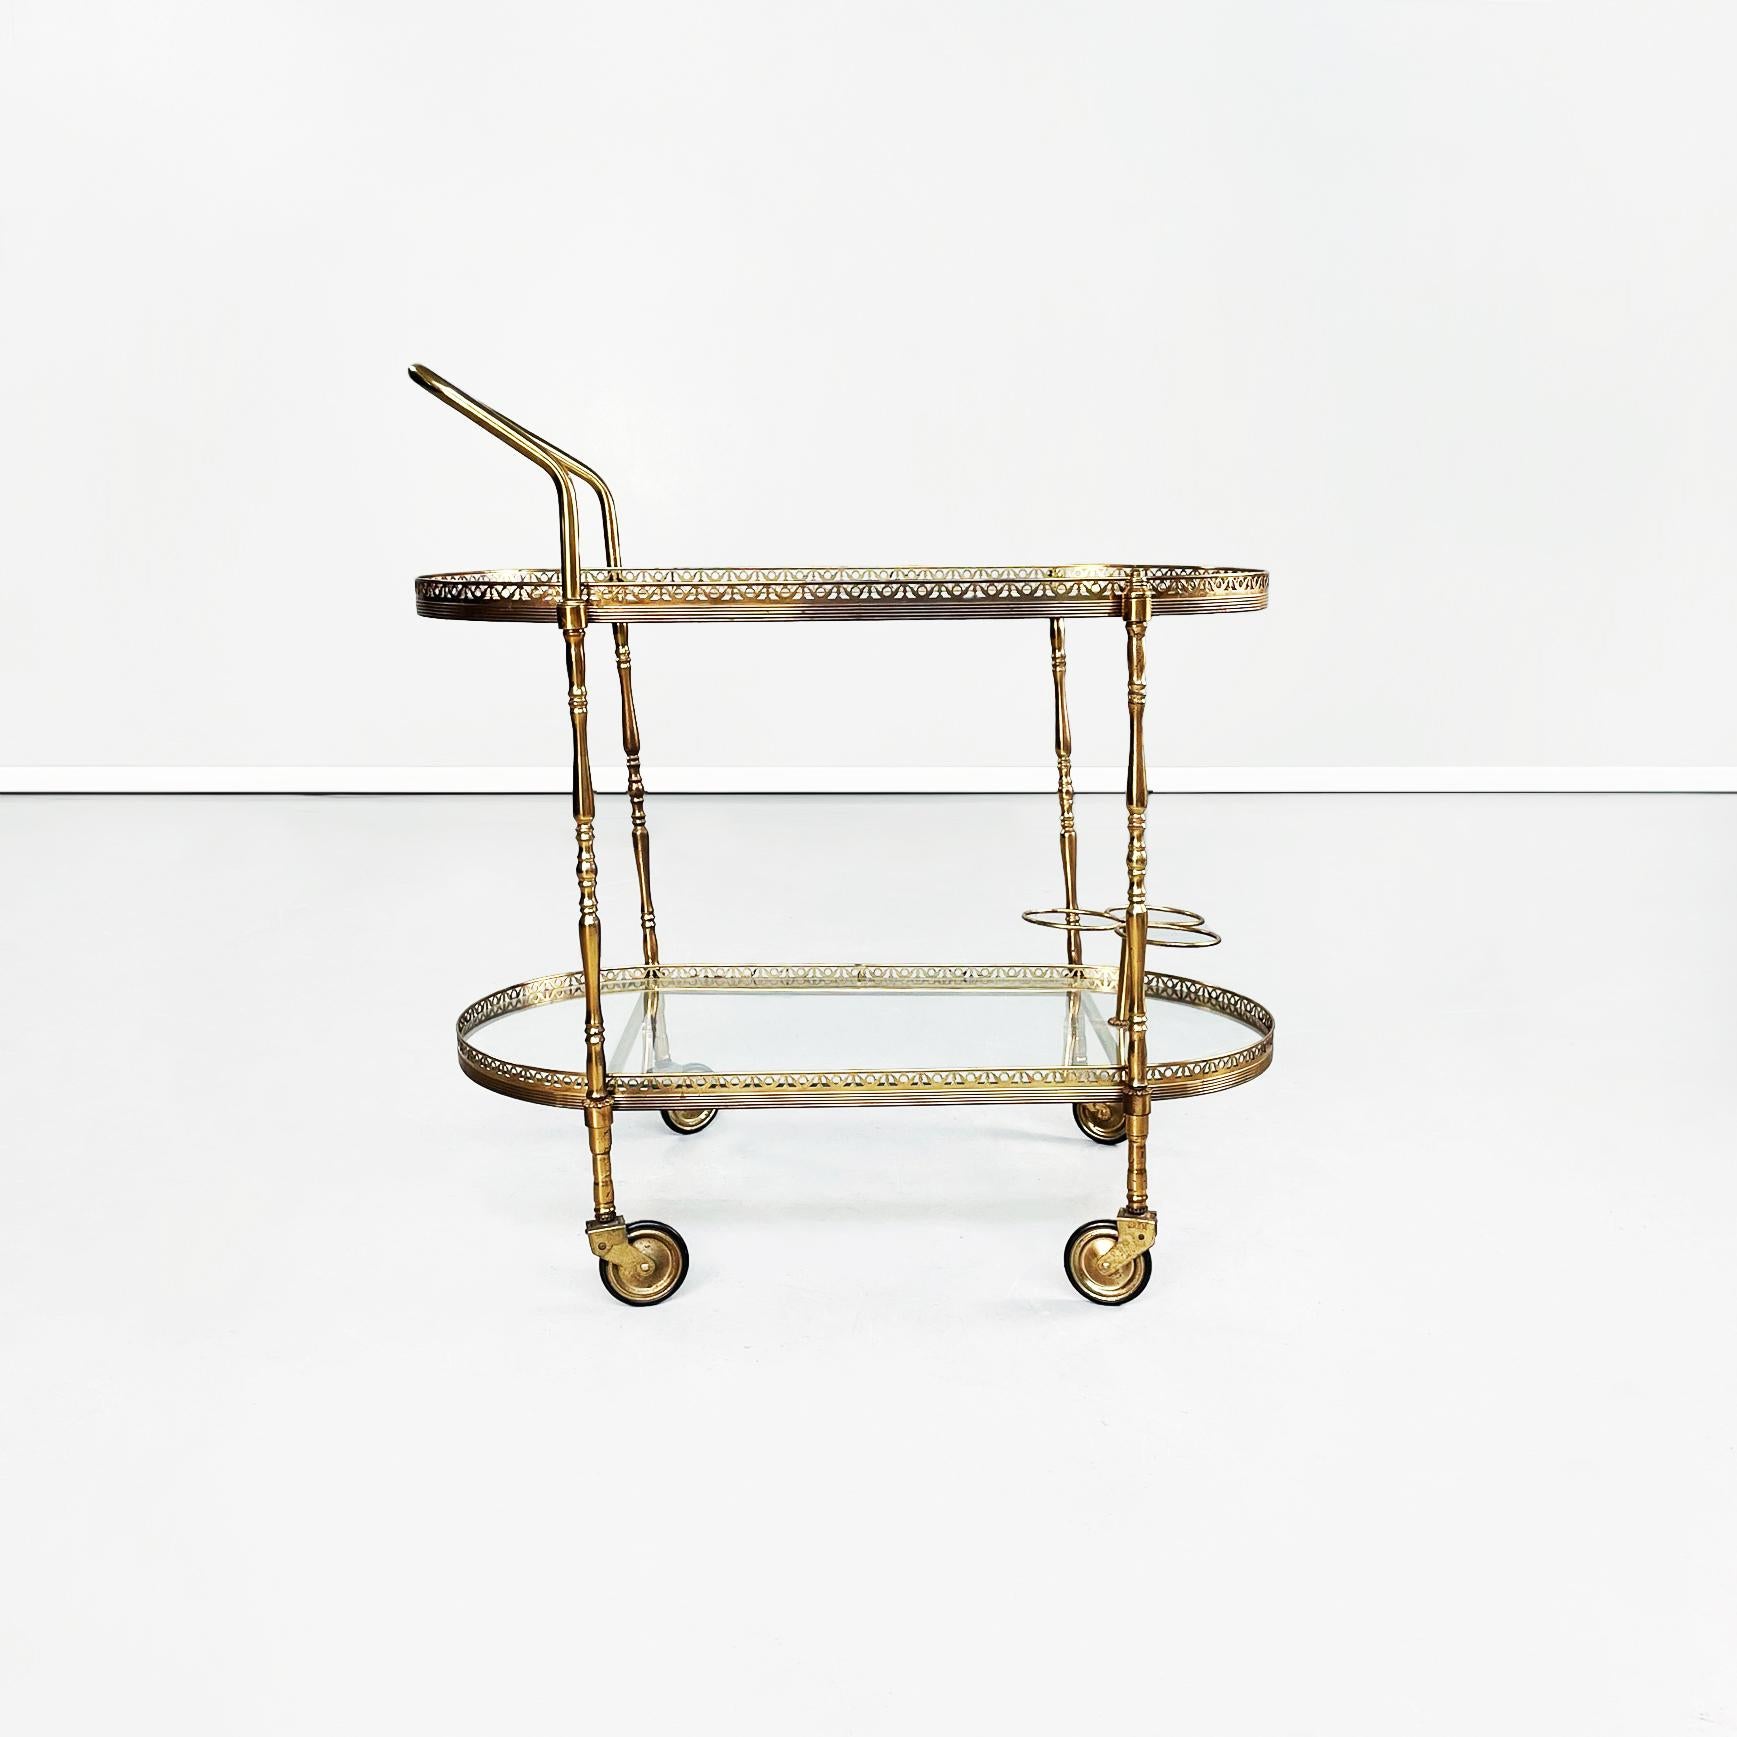 Italian mid-century oval bar cart in brass and glass, 1950s
Brass oval food trolley. The two tops are made up of two sheets of transparent glass resting on a finely worked brass structure, on the lower one there are three bottle holders. The bar